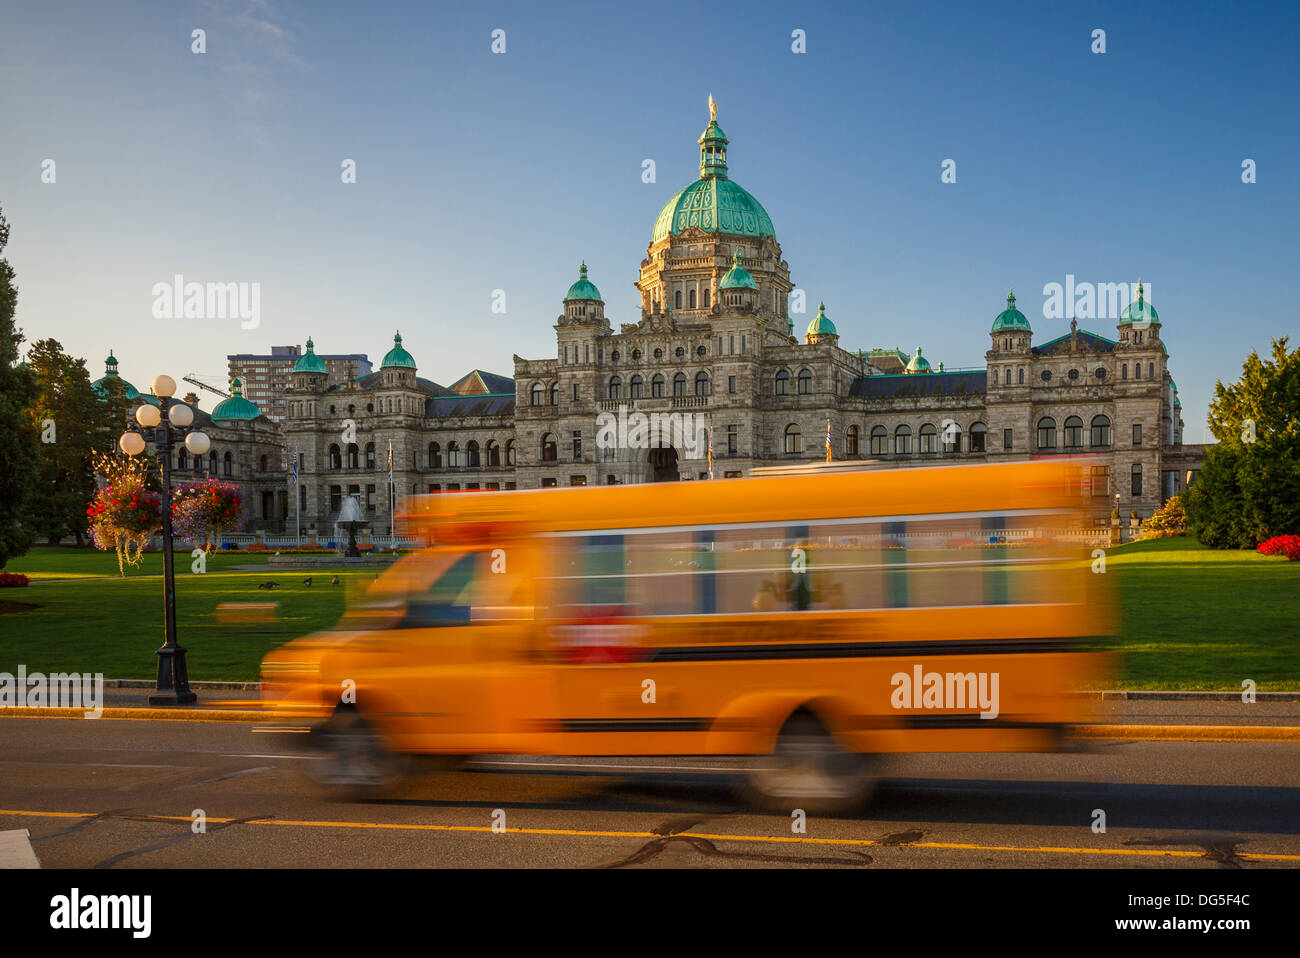 The Parliament of British Columbia in Victoria Canada with school bus Stock Photo